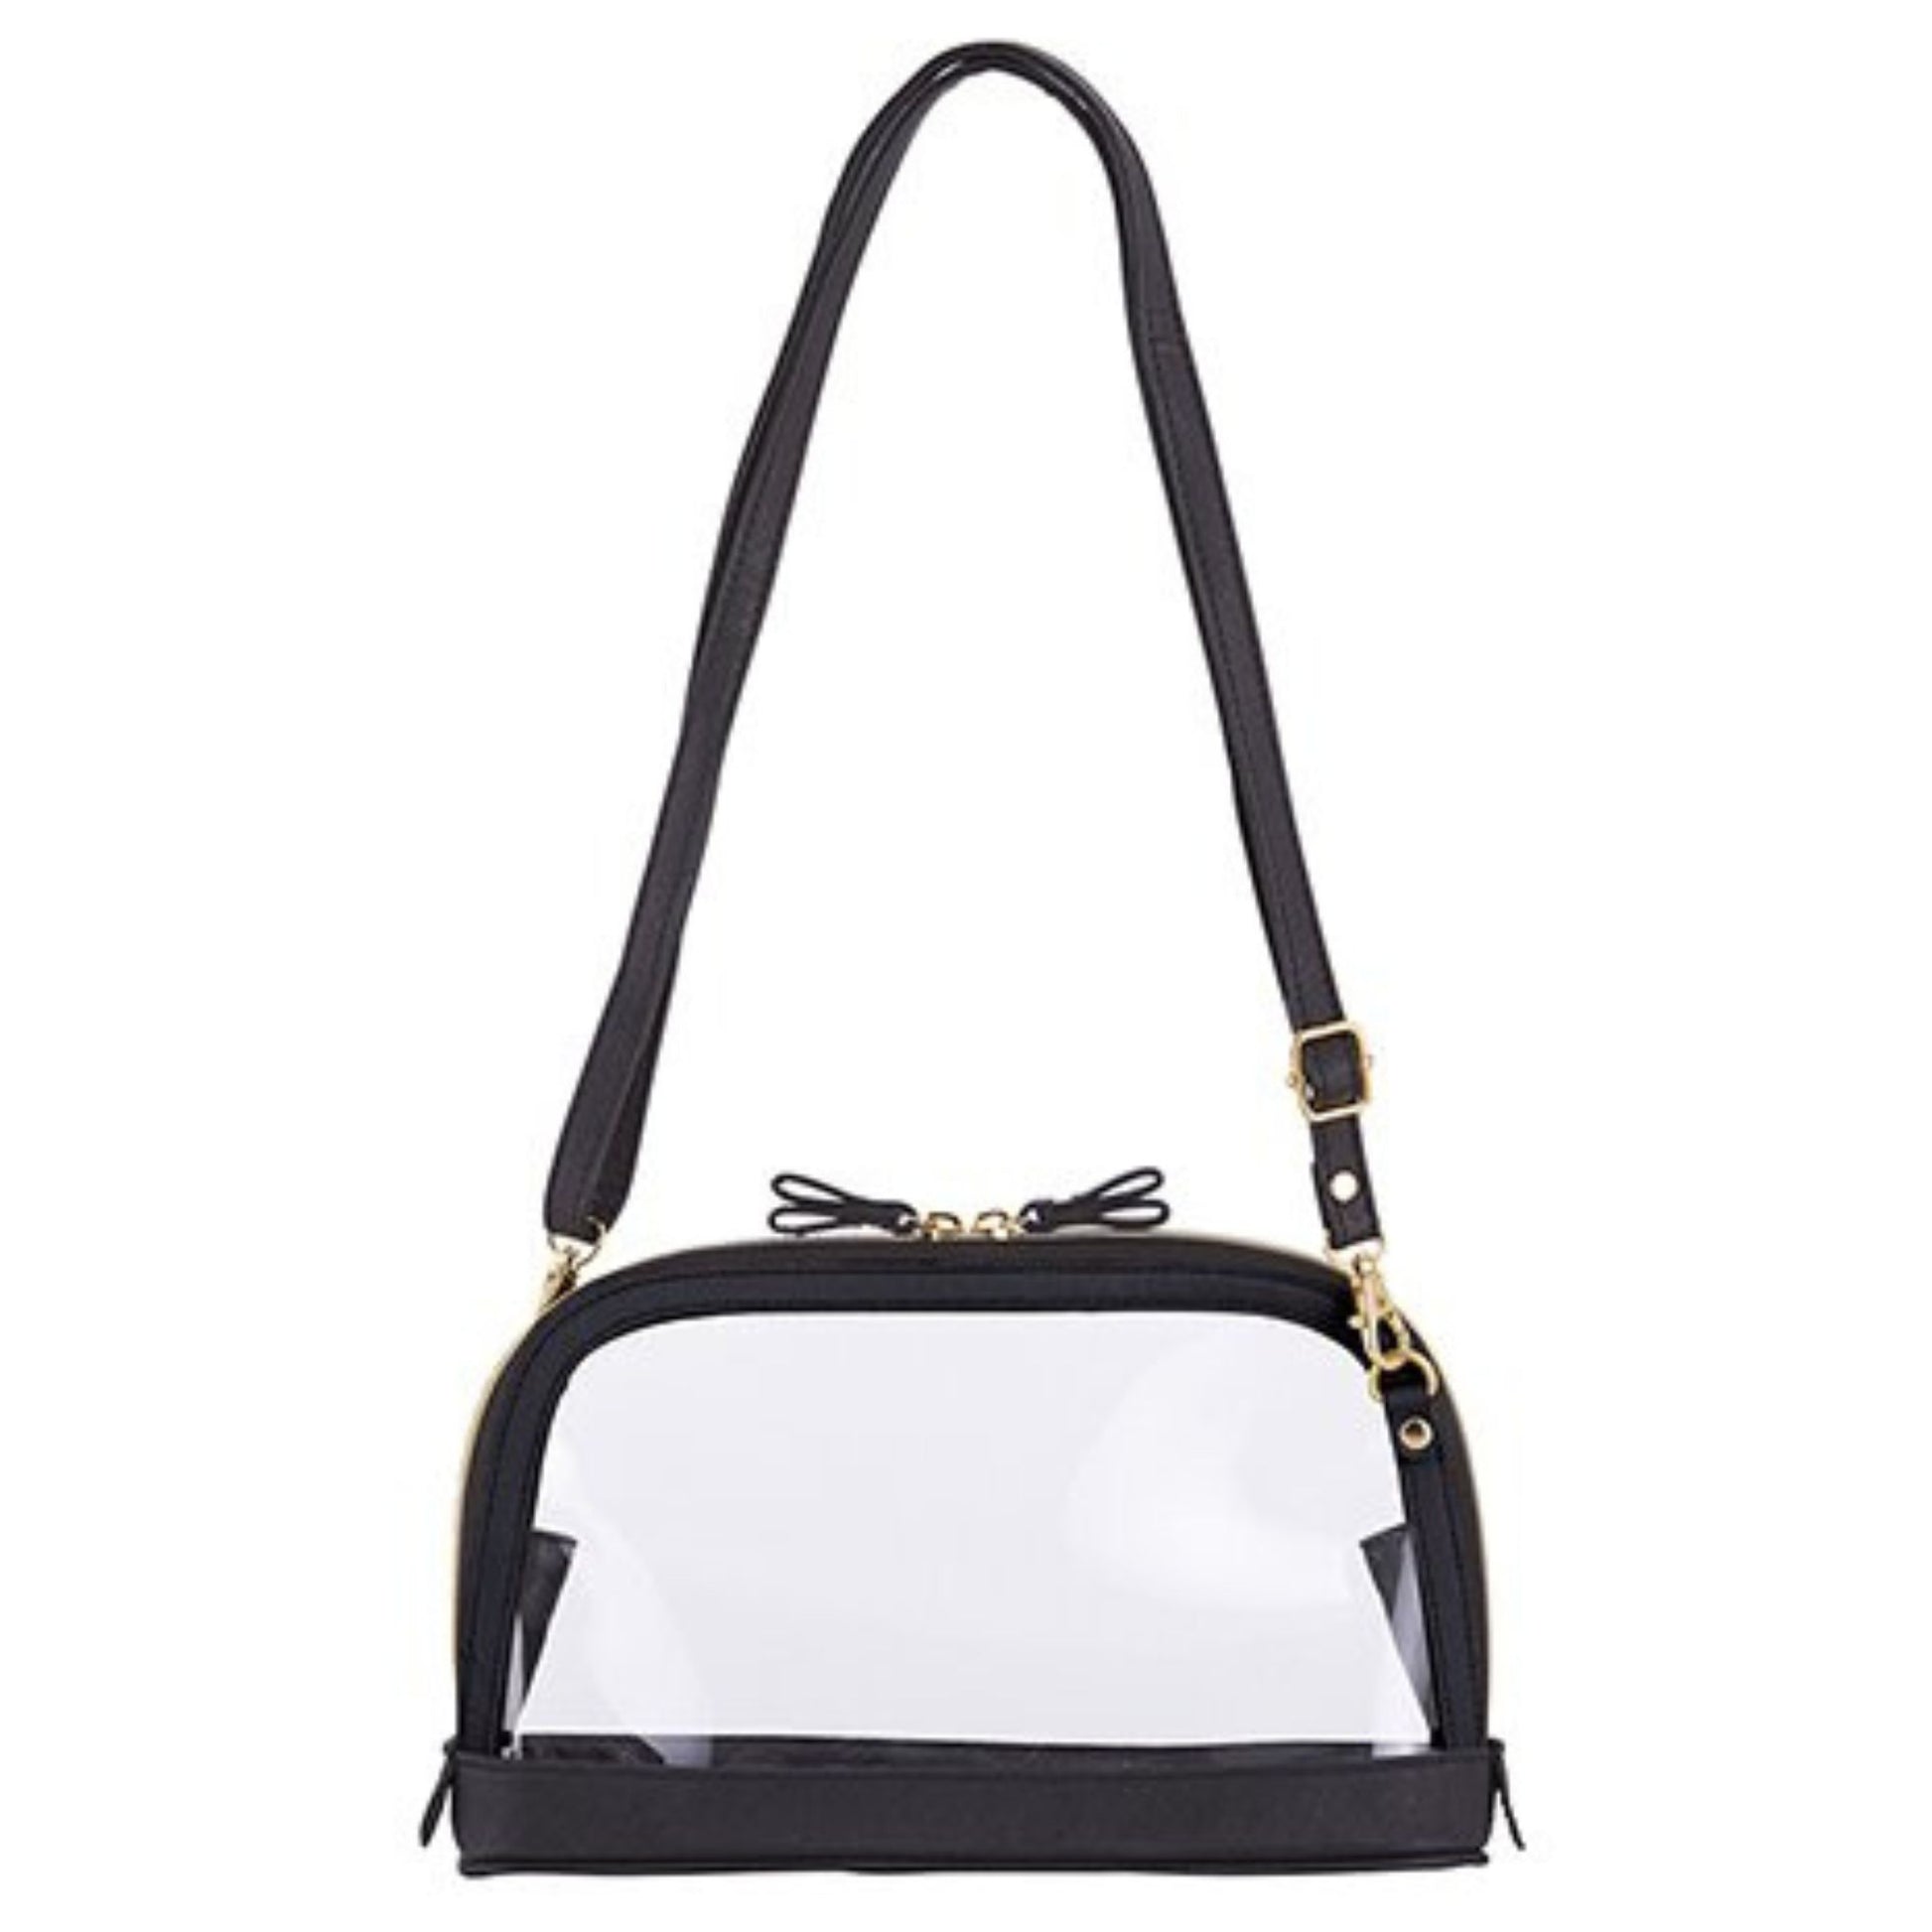 Clear Stadium Bag - Clear Purse with Strap and Bow - Clear Compliant Bag (2 options) | Be venue compliant in style with a clear purse | Black on Black Purse Shown | oak7west.com